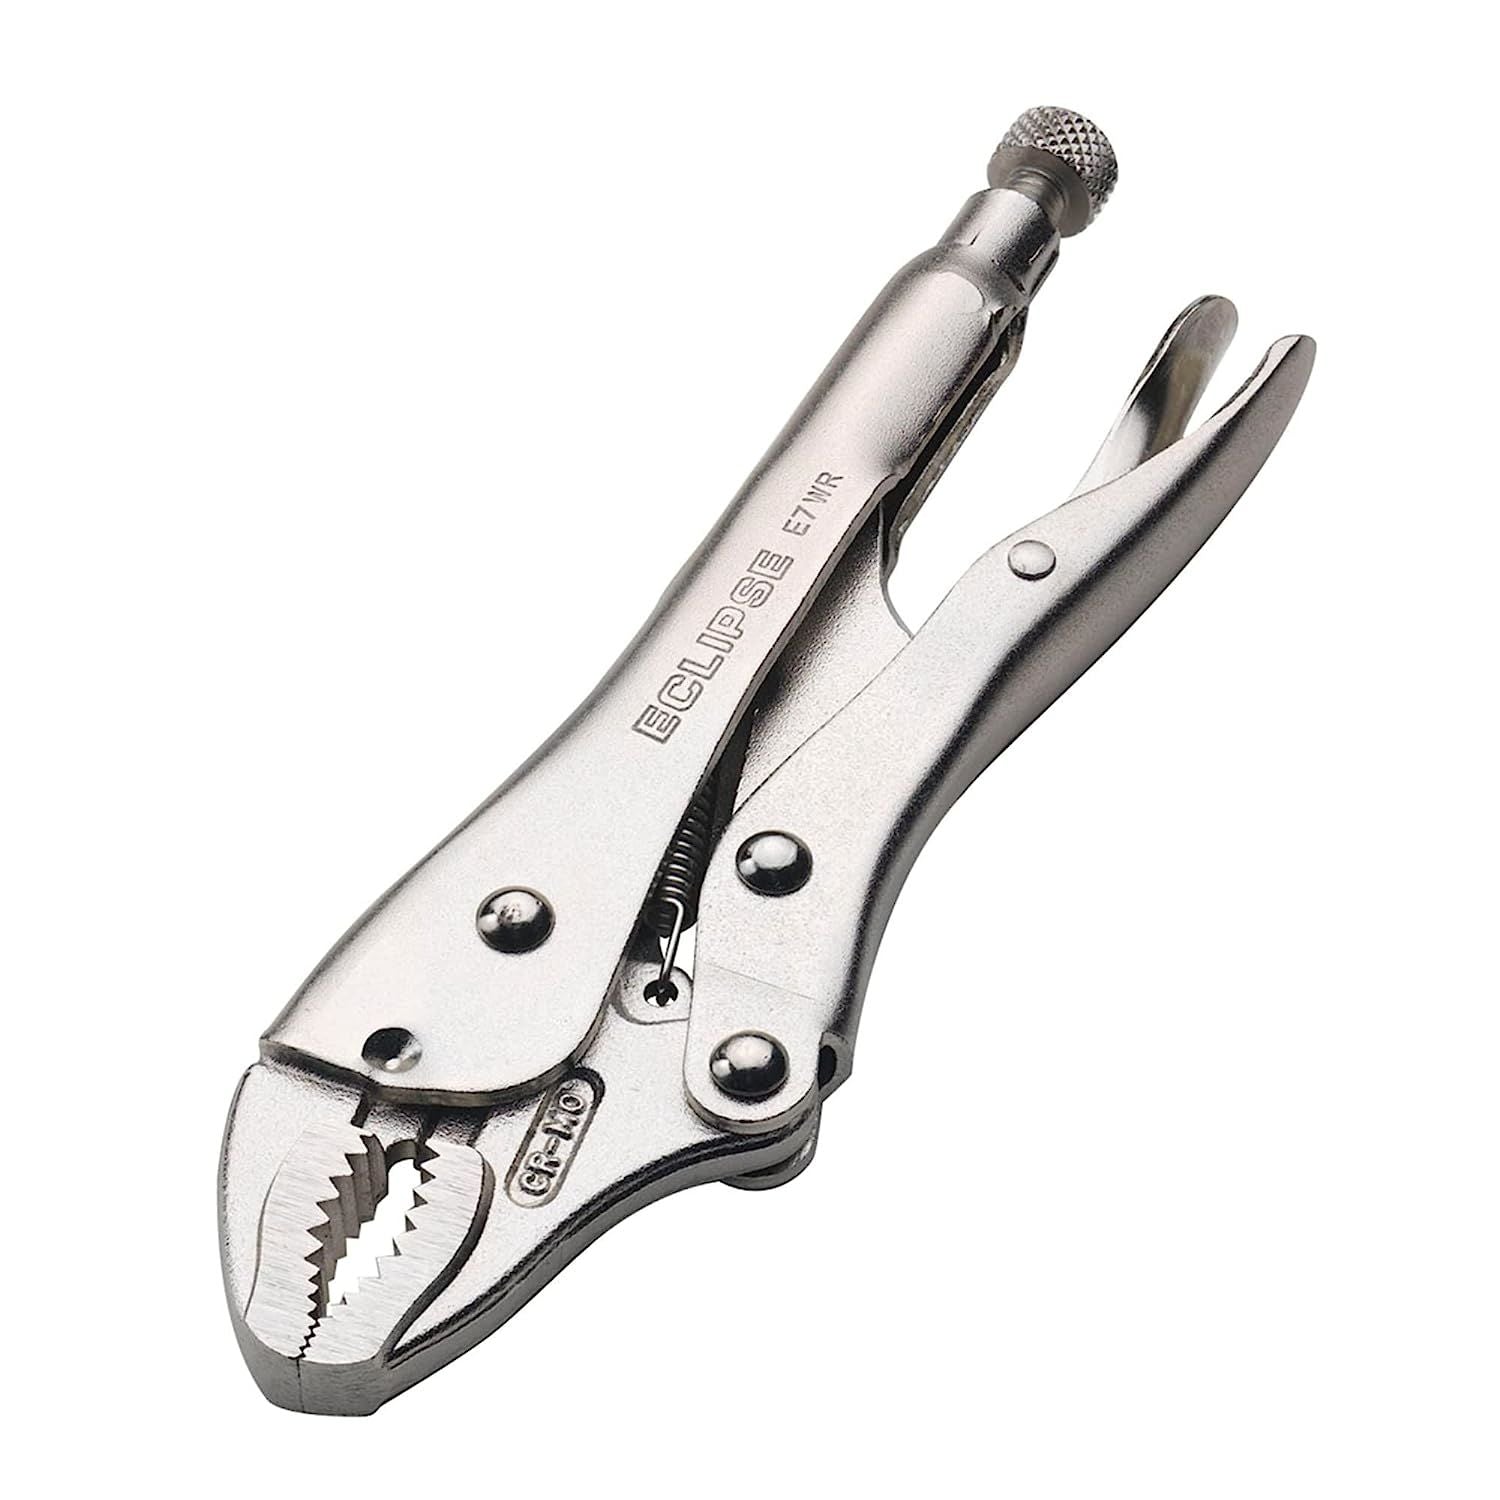 Curved Jaw Locking Pliers with Wire Cutters, Chrome Molybdenum Steel, 7-Inch Size, 1-1/2-Inch Jaw Capacity